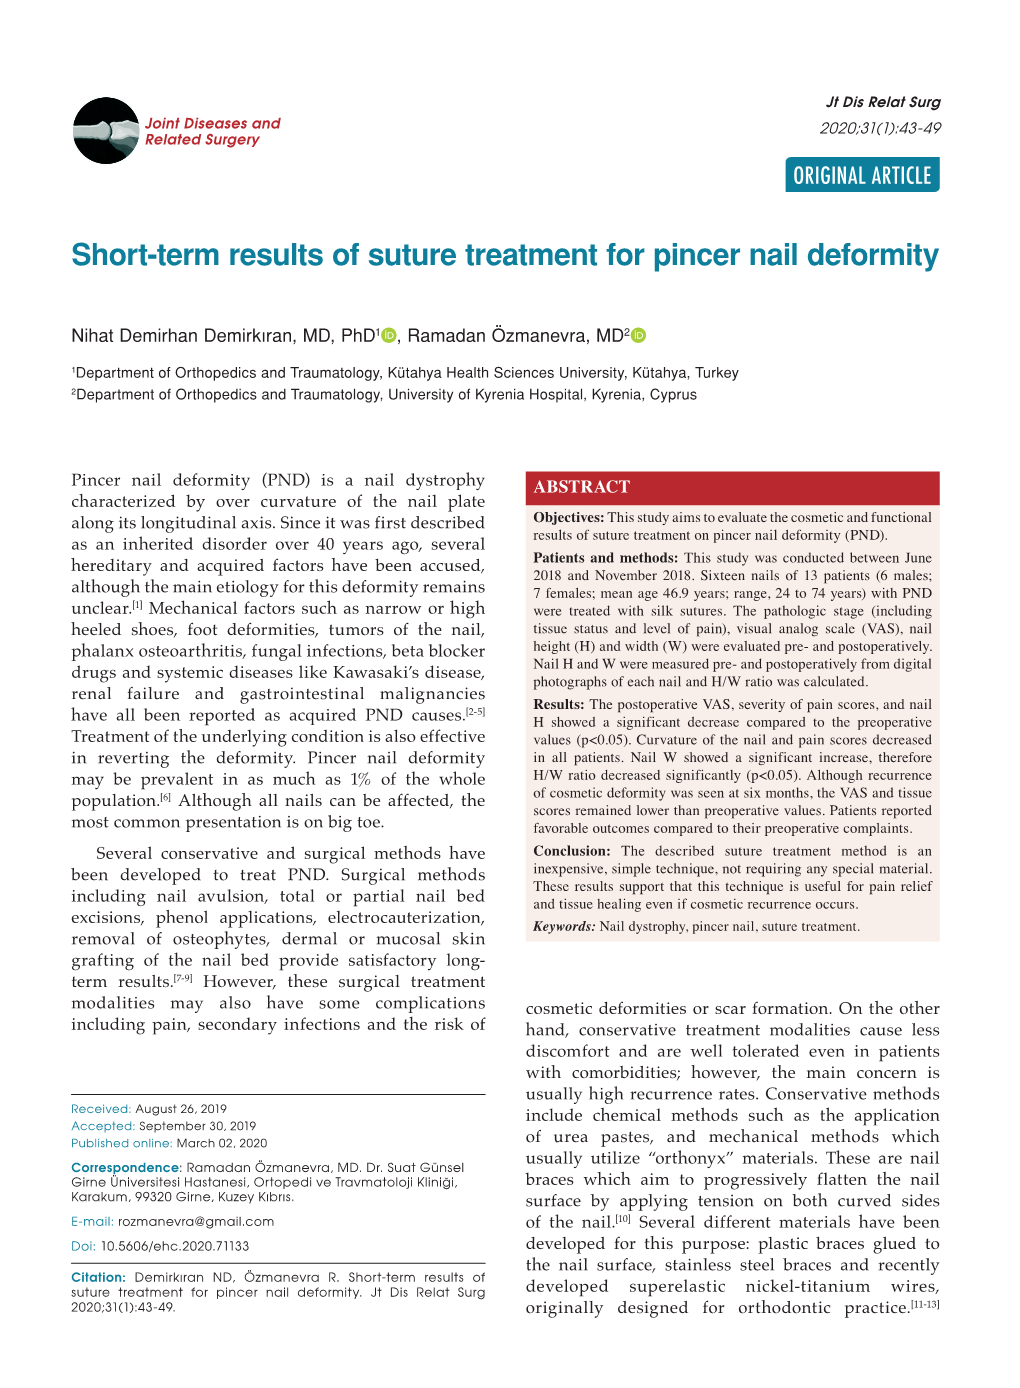 Short-Term Results of Suture Treatment for Pincer Nail Deformity